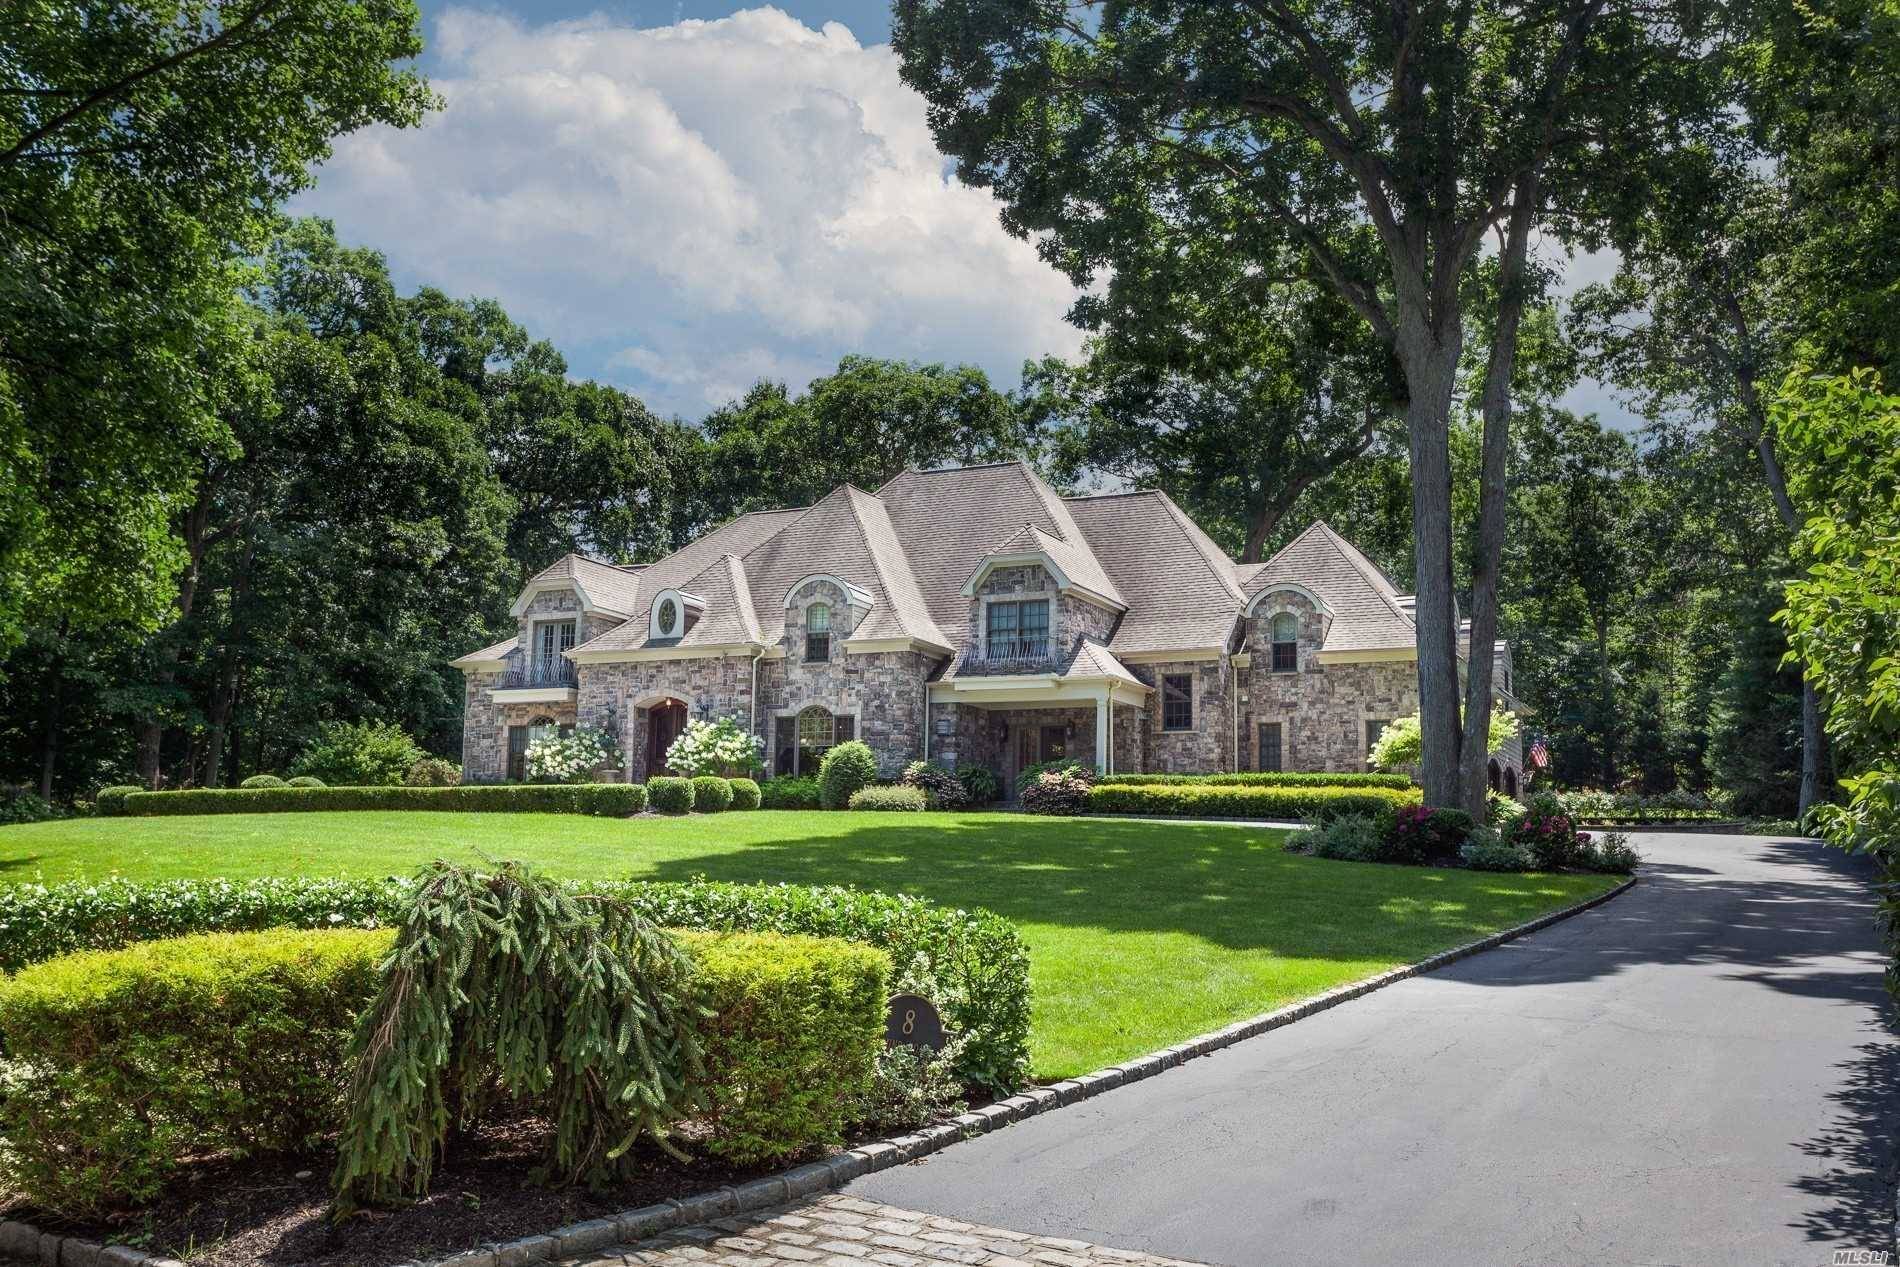 Recently Custom Built In 2006, Luxury Colonial With Grand Water View Of Long Island Sound.